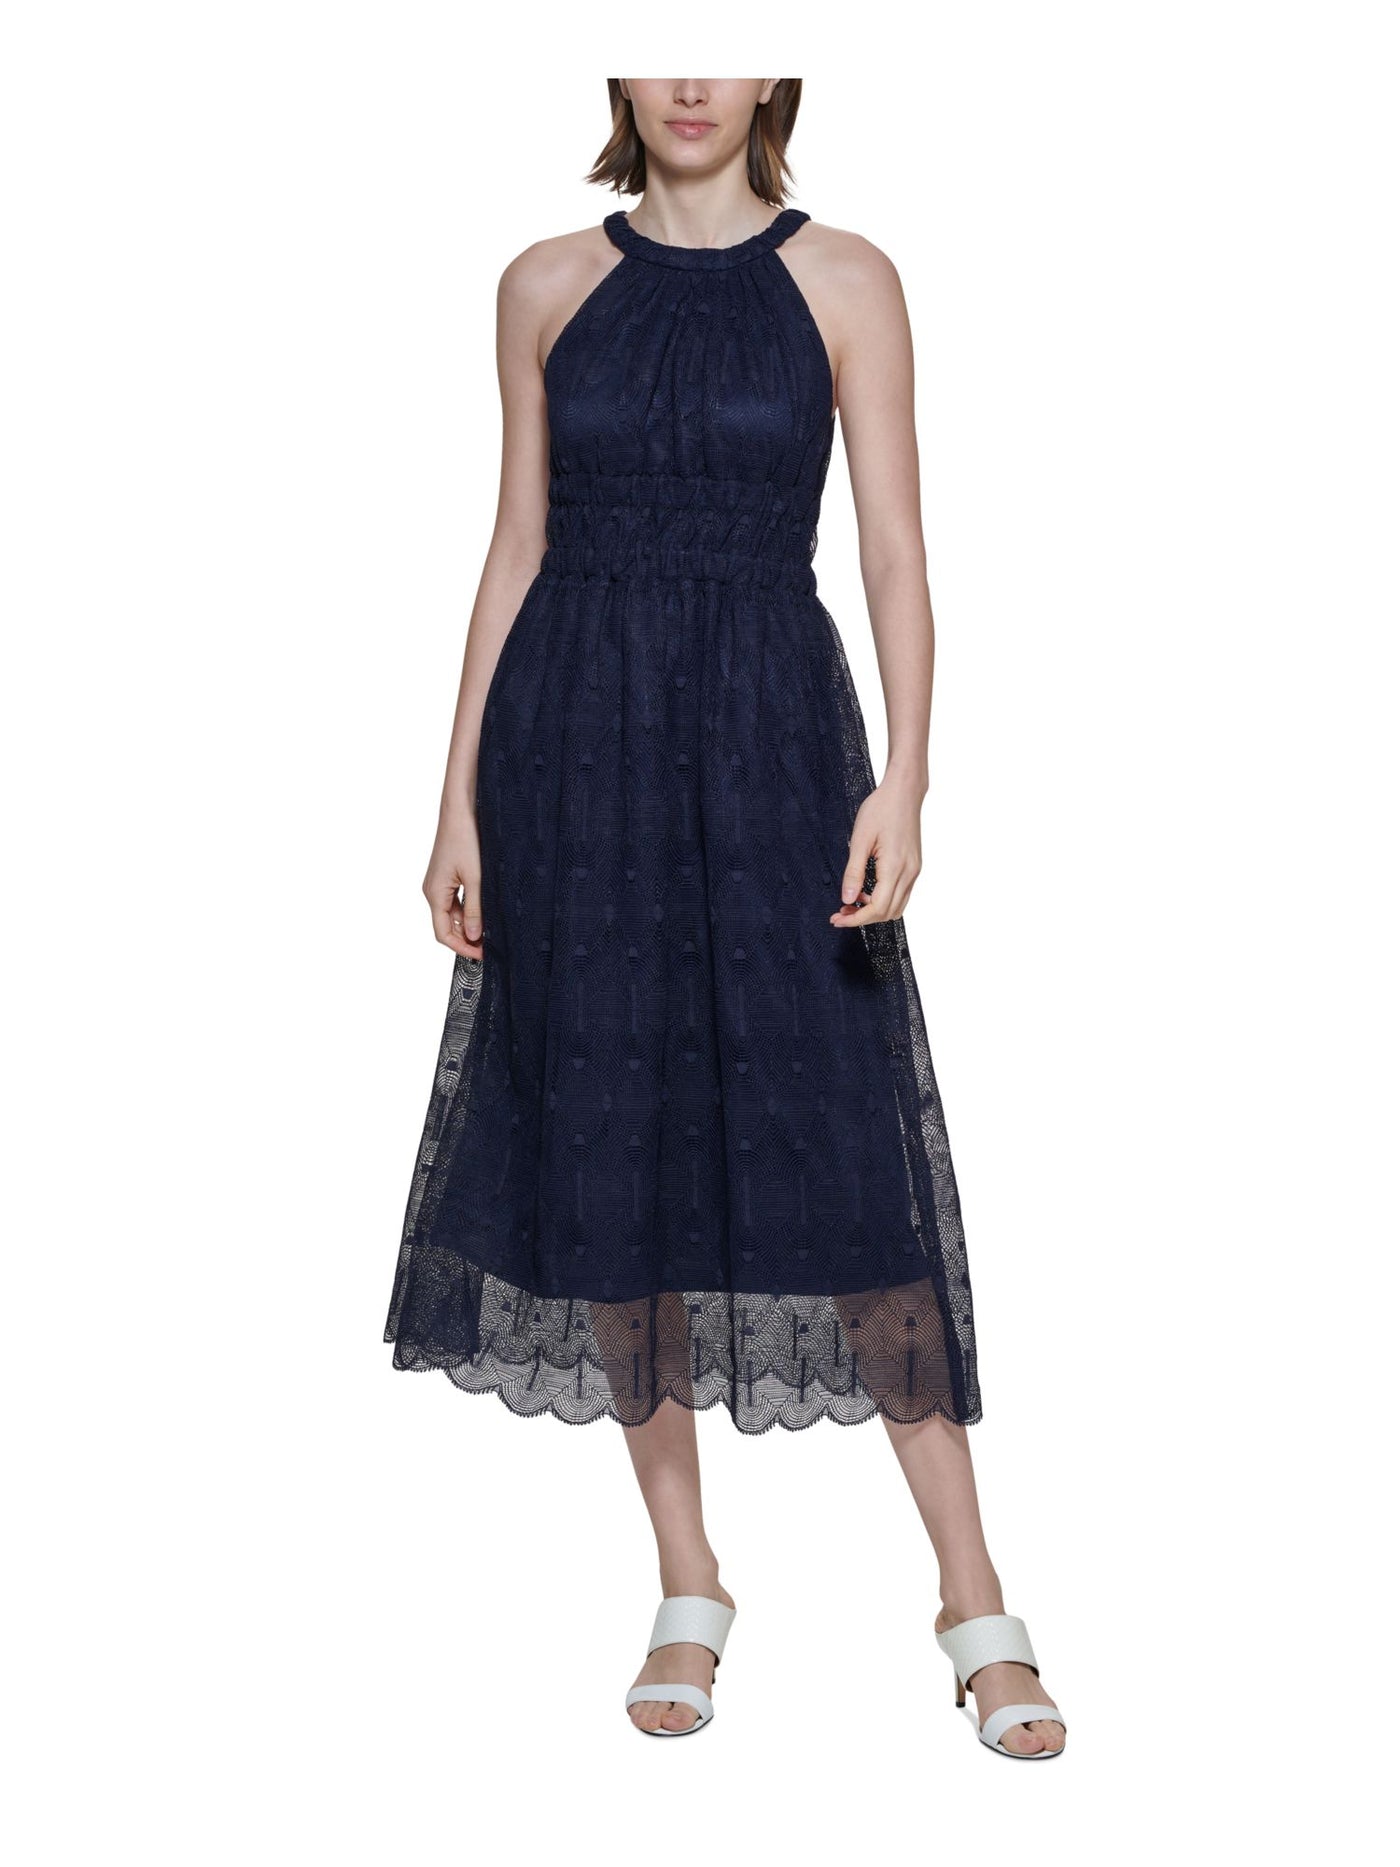 CALVIN KLEIN Womens Navy Zippered Textured Lace Lined Smocked Scalloped Sleeveless Halter Tea-Length Fit + Flare Dress 8